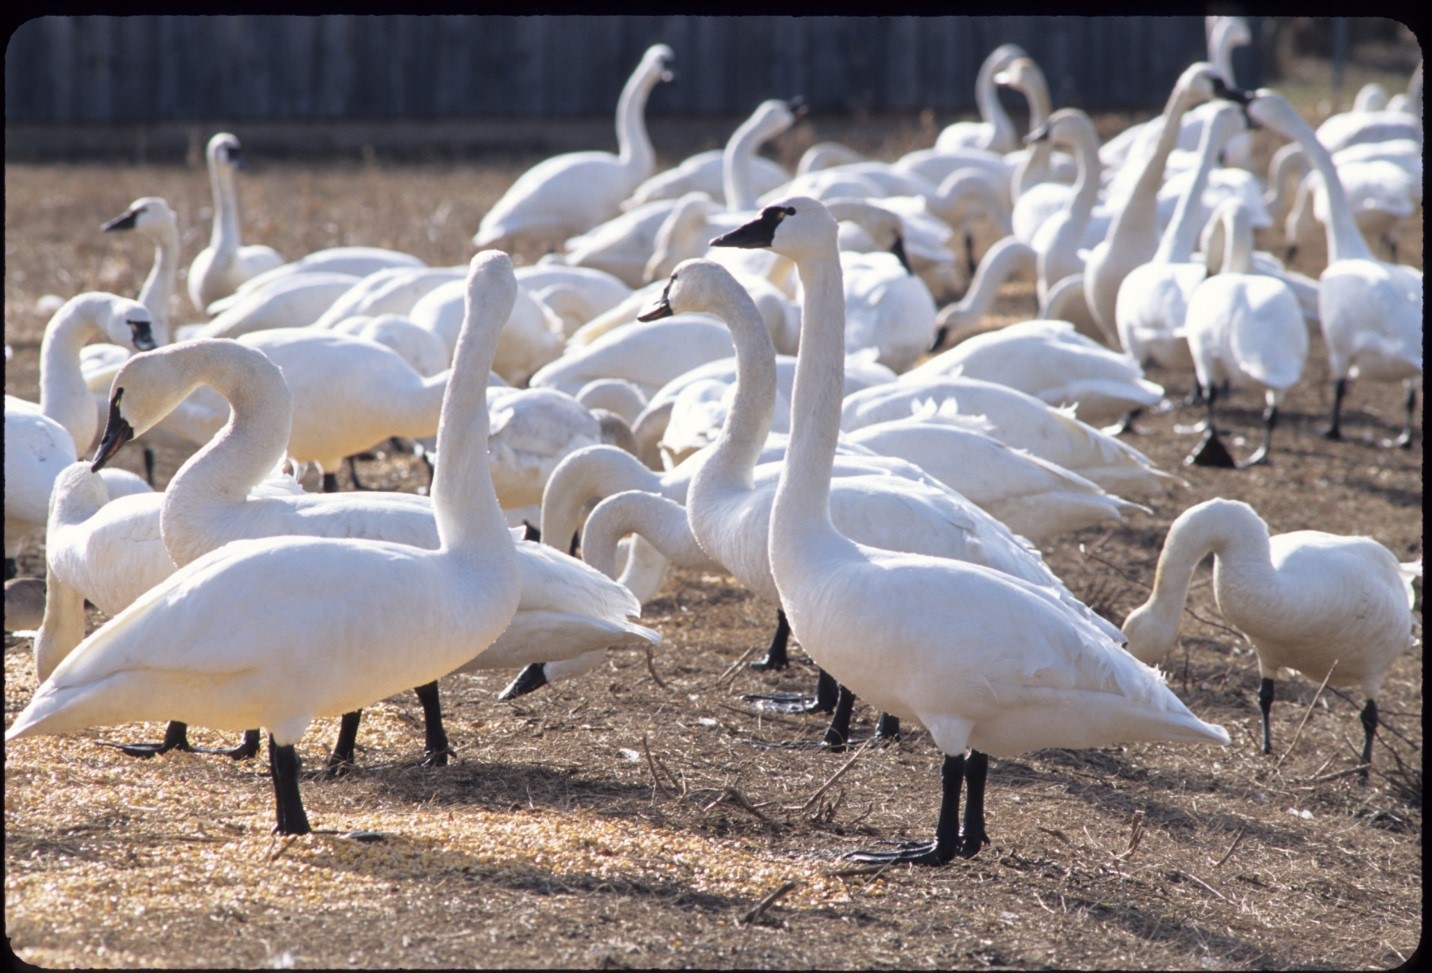 This wildlife area is best known for attracting waterfowl and other birds, including the dramatic sight of tundra swans in spring. © Elgin Stewardship Council